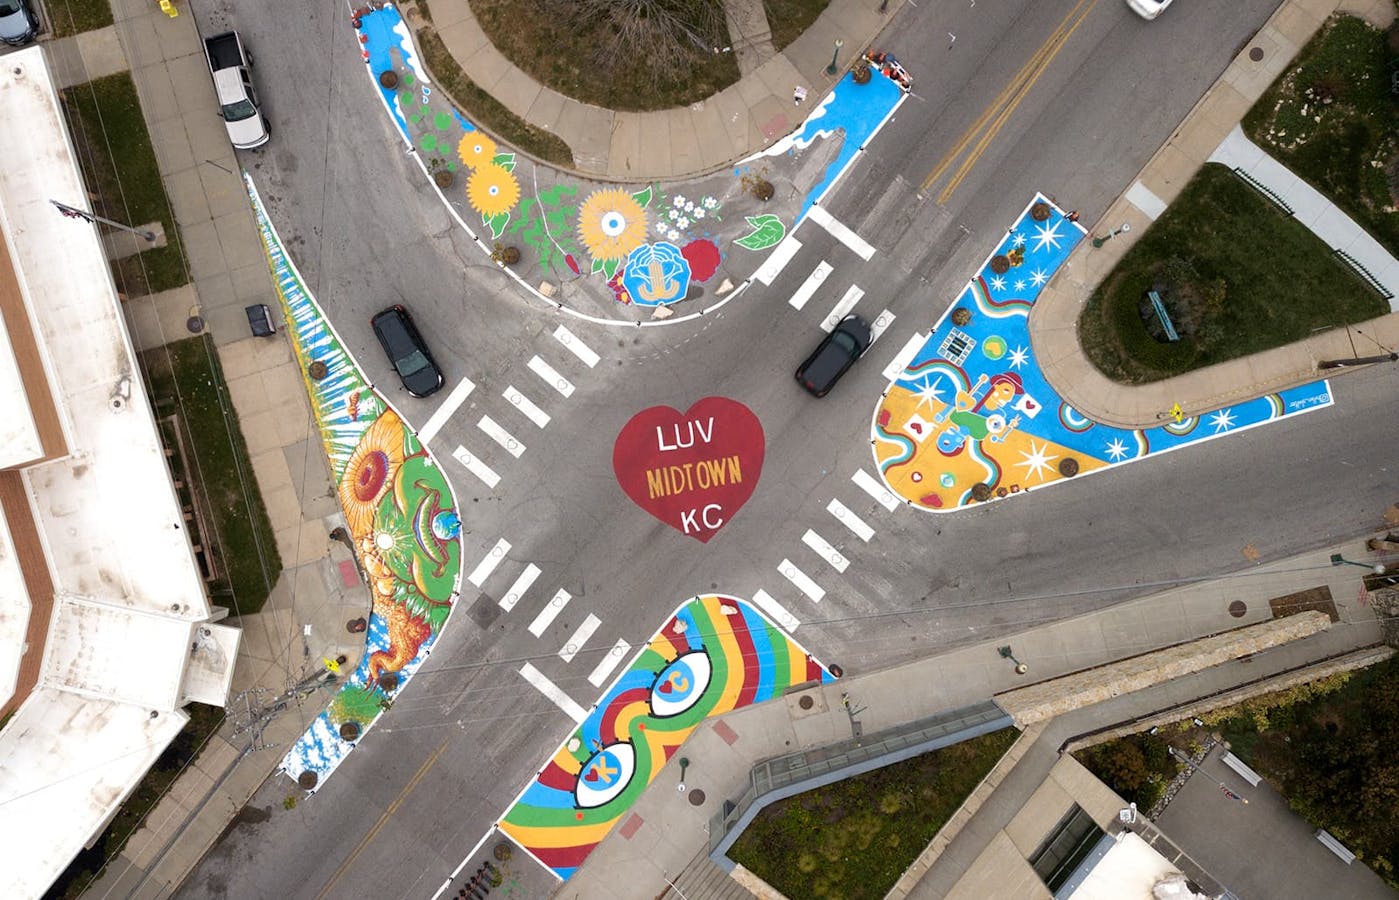 A street mural in Kansas City, MO, helped cut driver speeds by 45% and inspire the “Asphalt Art Safety Study.” (Photos courtesy of Bloomberg Philanthropies)